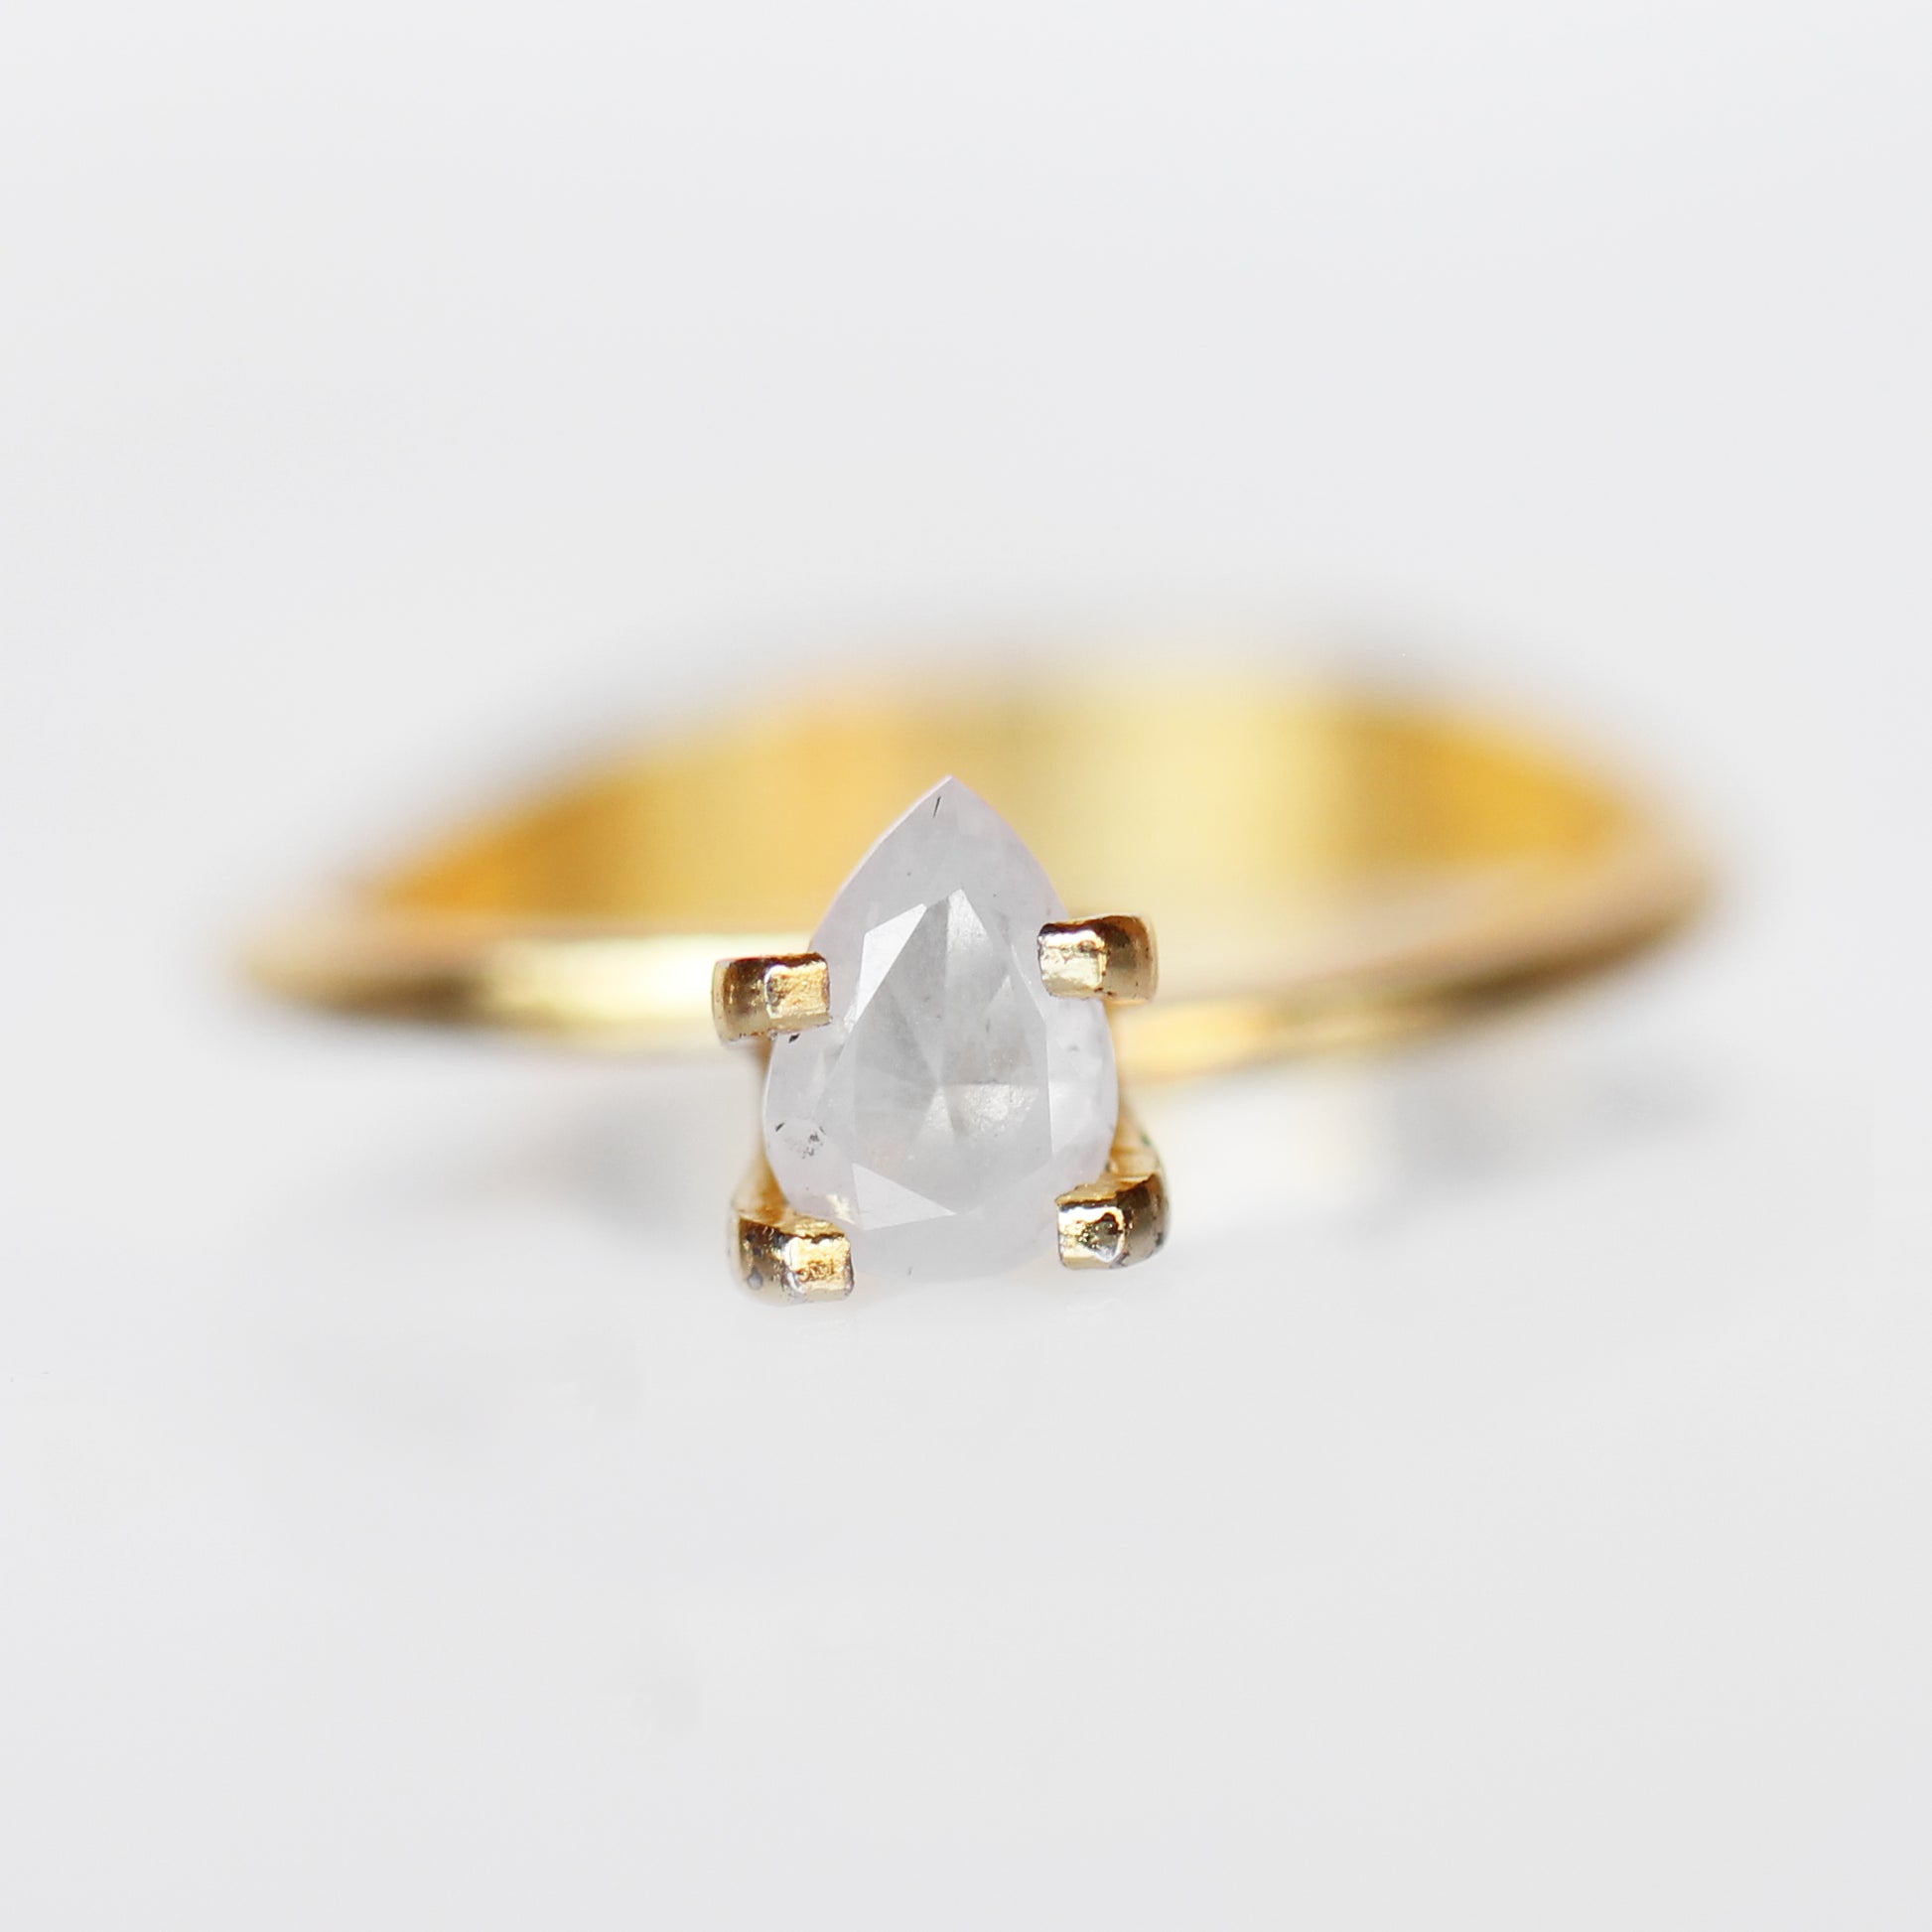 .72 Carat Pear Celestial Diamond-Inventory Code PBWC72 - Midwinter Co. Alternative Bridal Rings and Modern Fine Jewelry